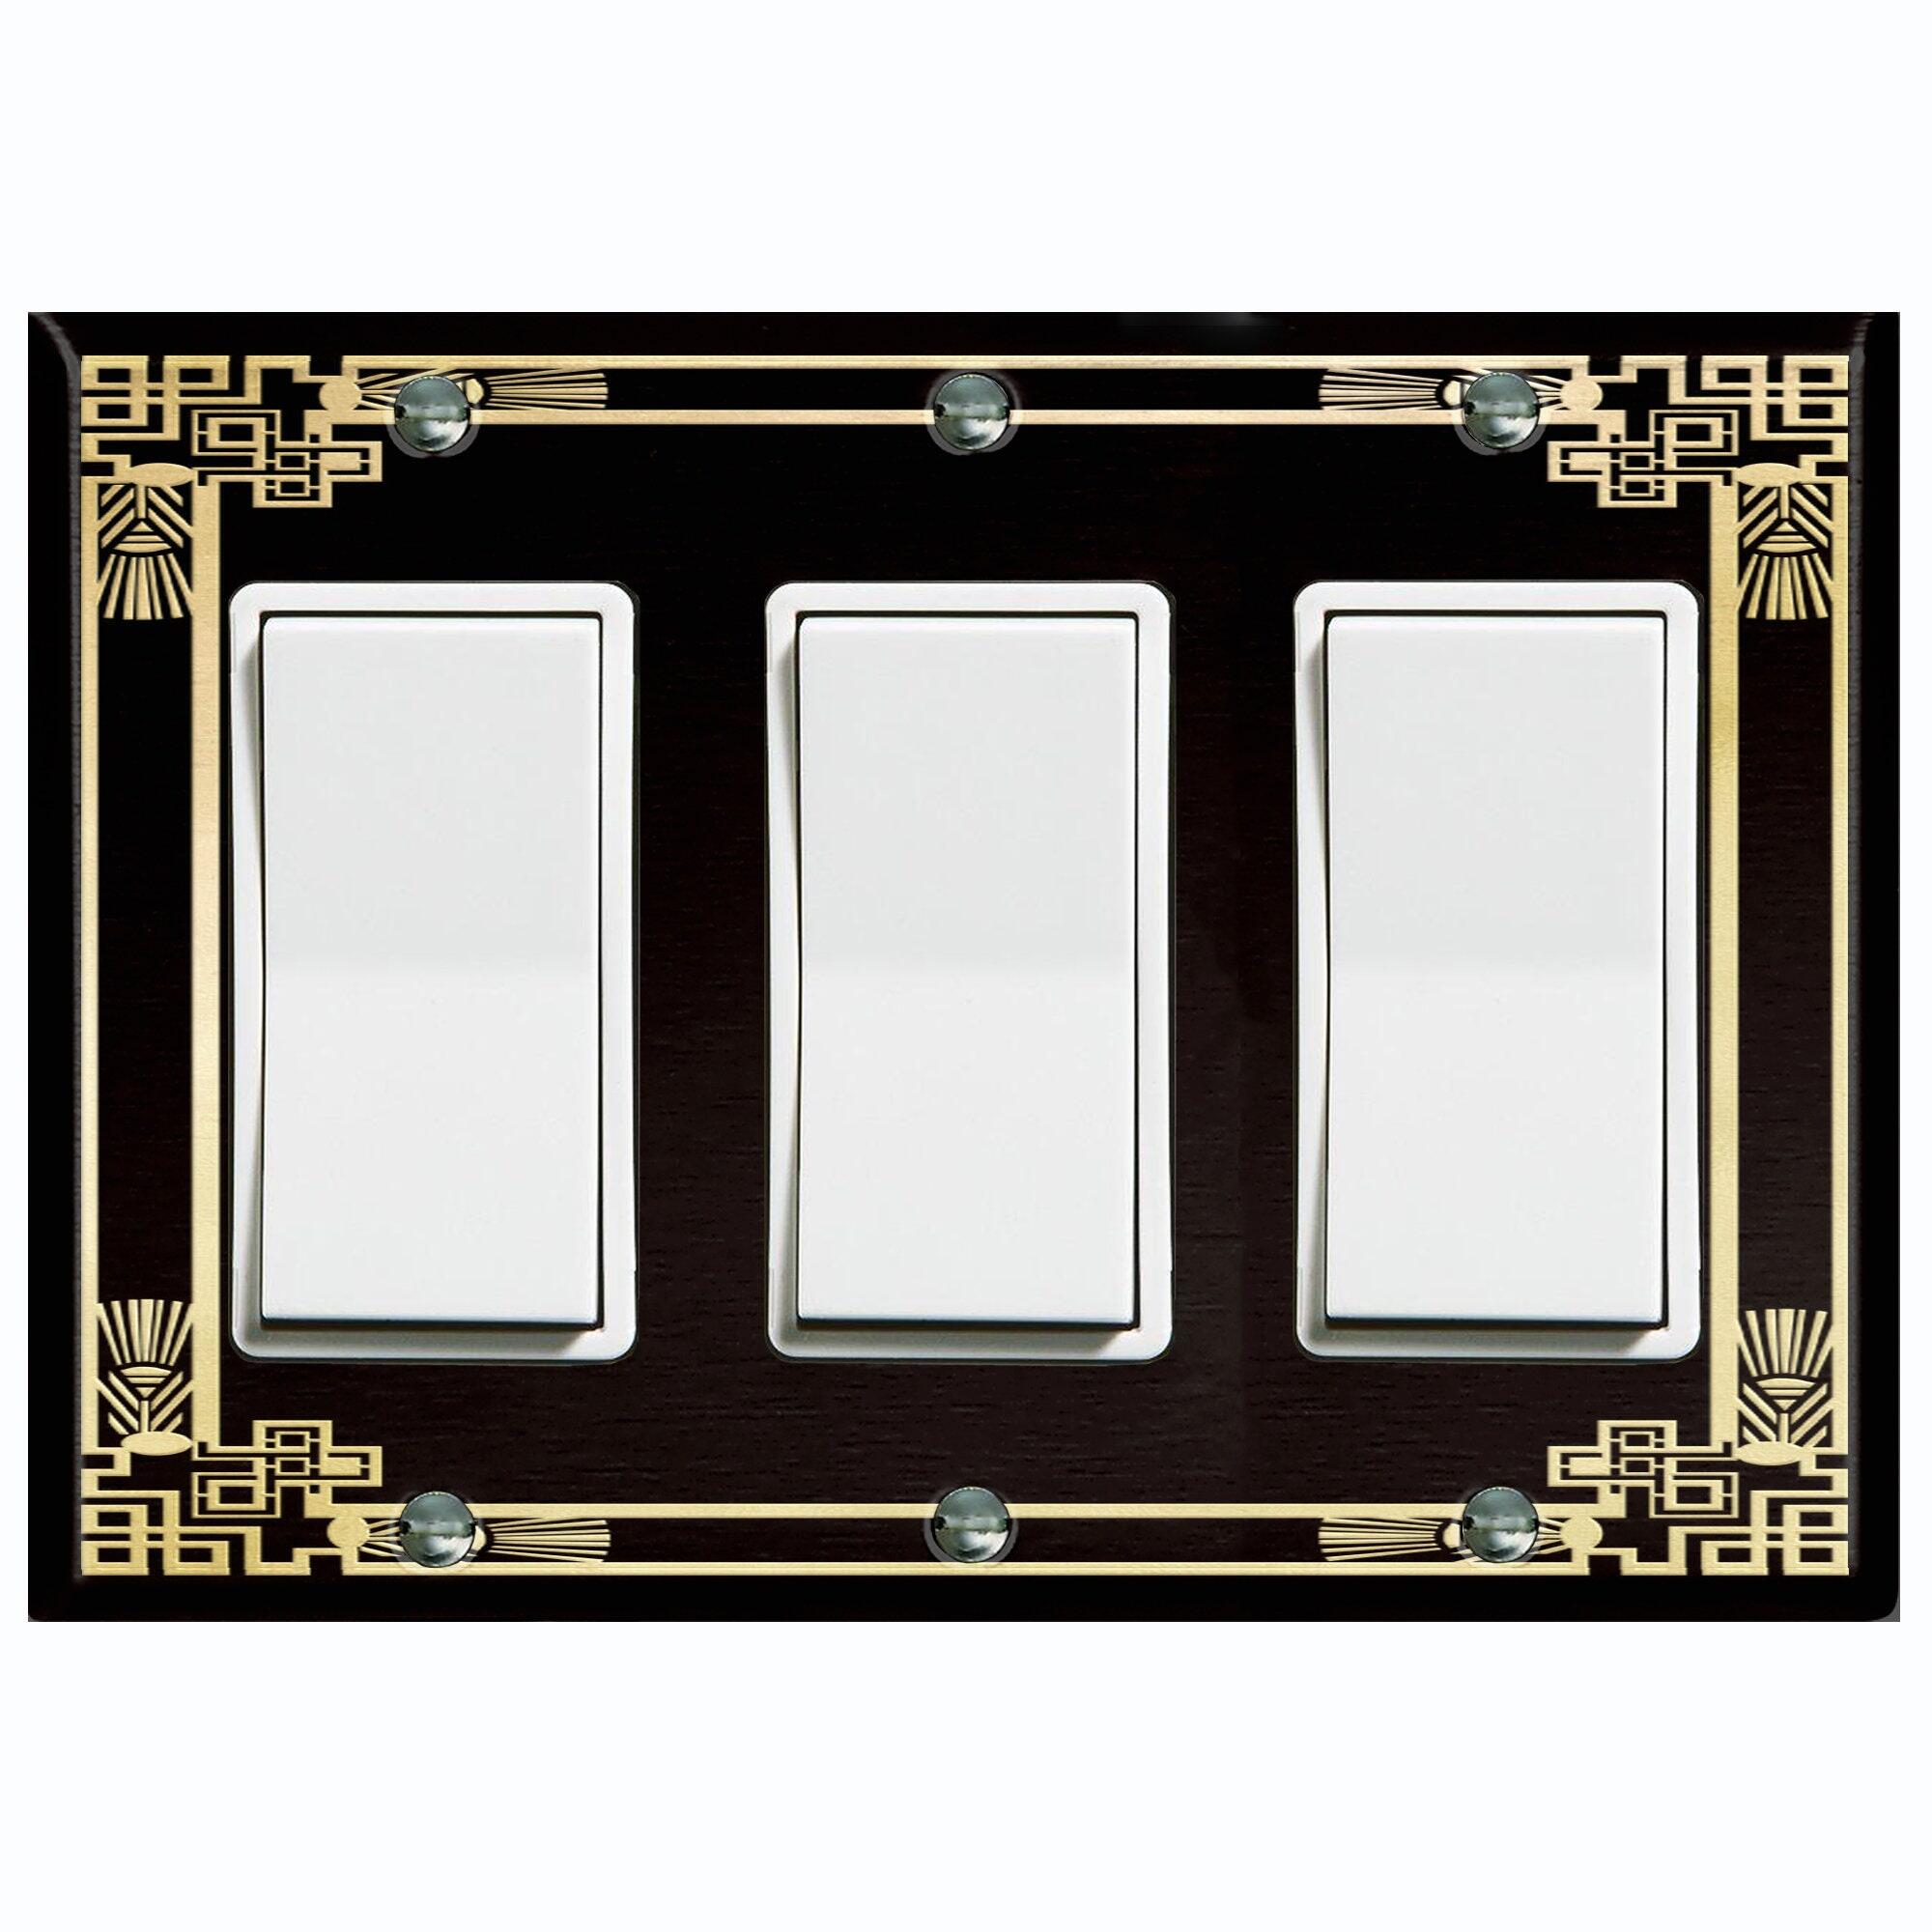 Light Switch Cover in Victorian Black Switch Cover 